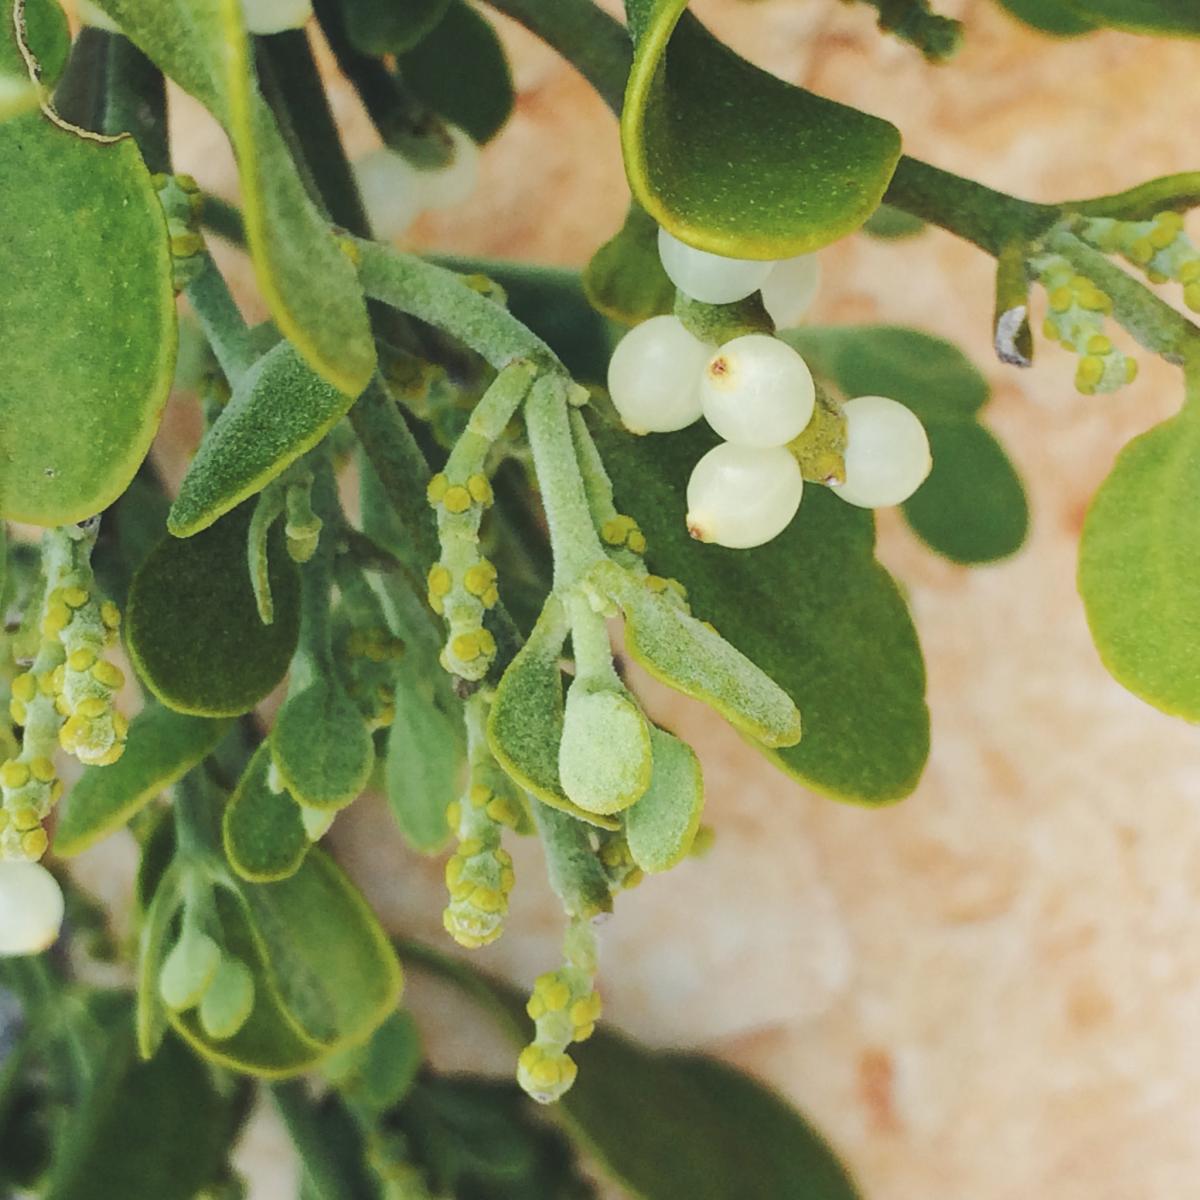 Close view of mistletoe leaves and berries